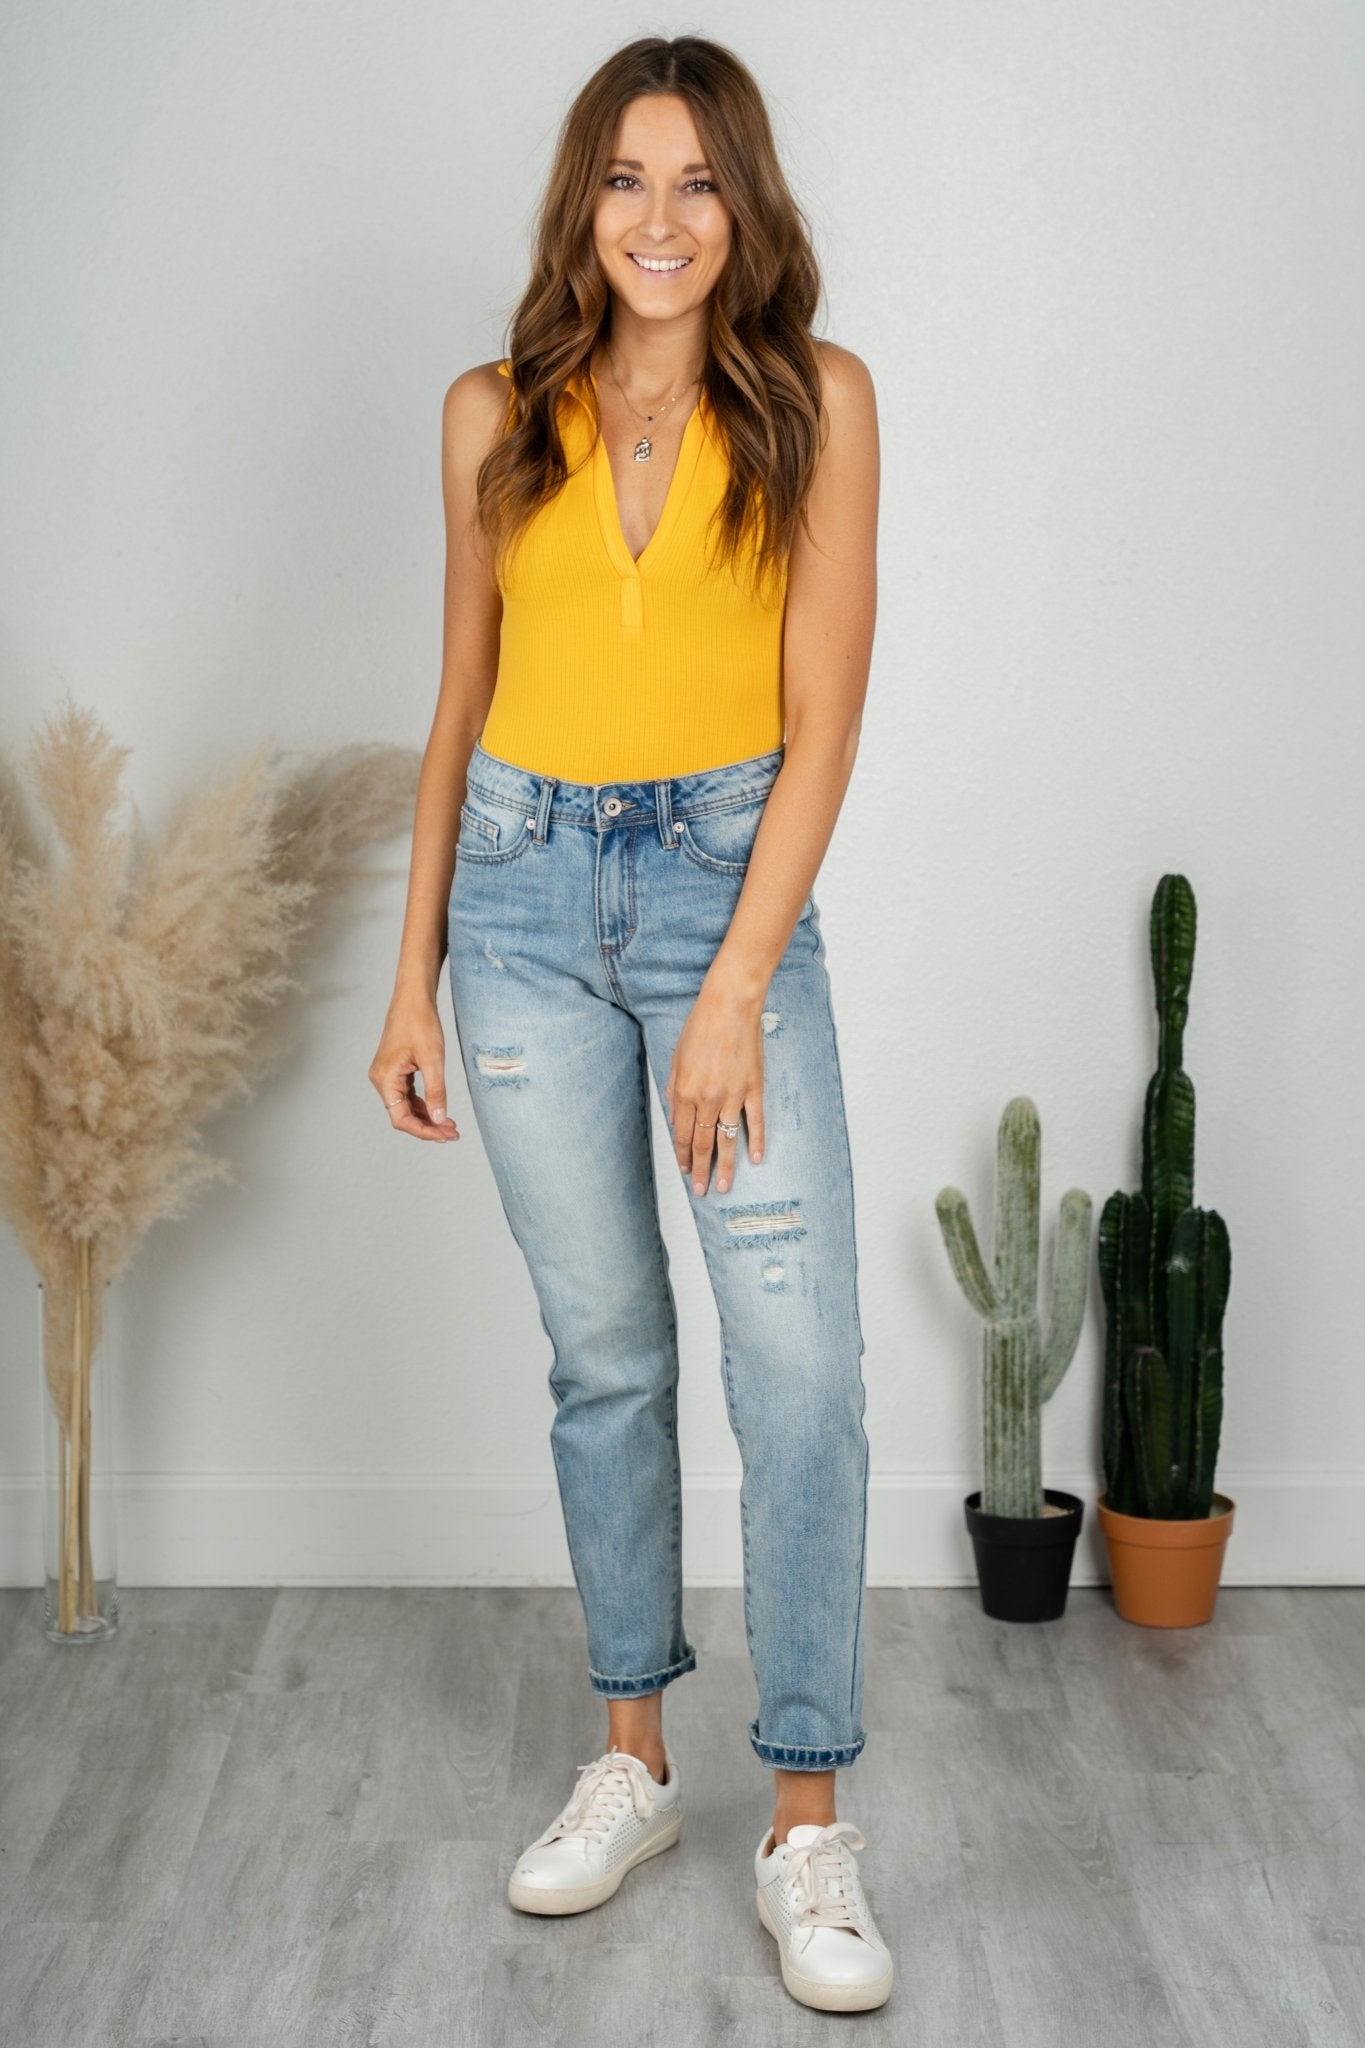 Collared v-neck ribbed bodysuit yellow - Trendy bodysuit - Fashion Bodysuits at Lush Fashion Lounge Boutique in Oklahoma City